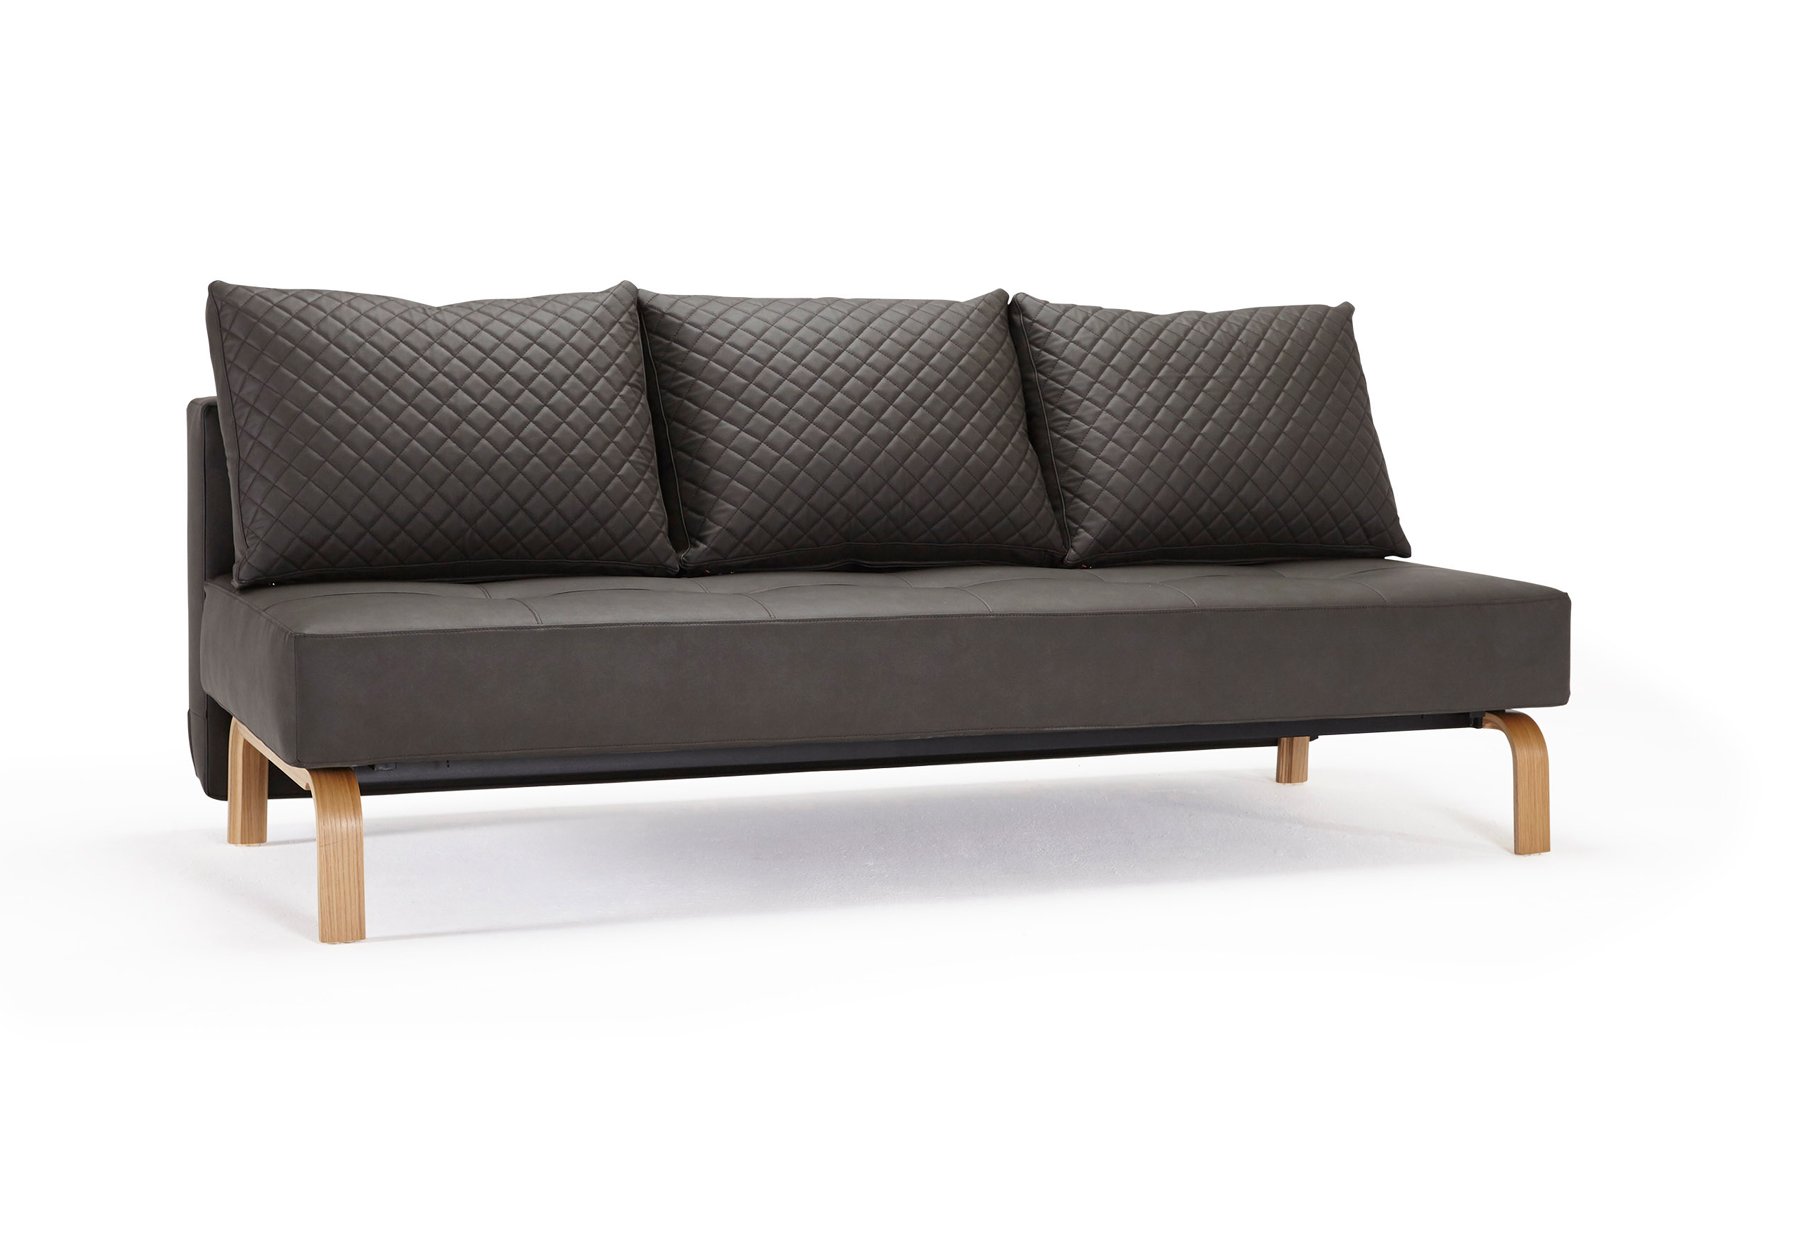 supremax Q deluxe excess sofa bed